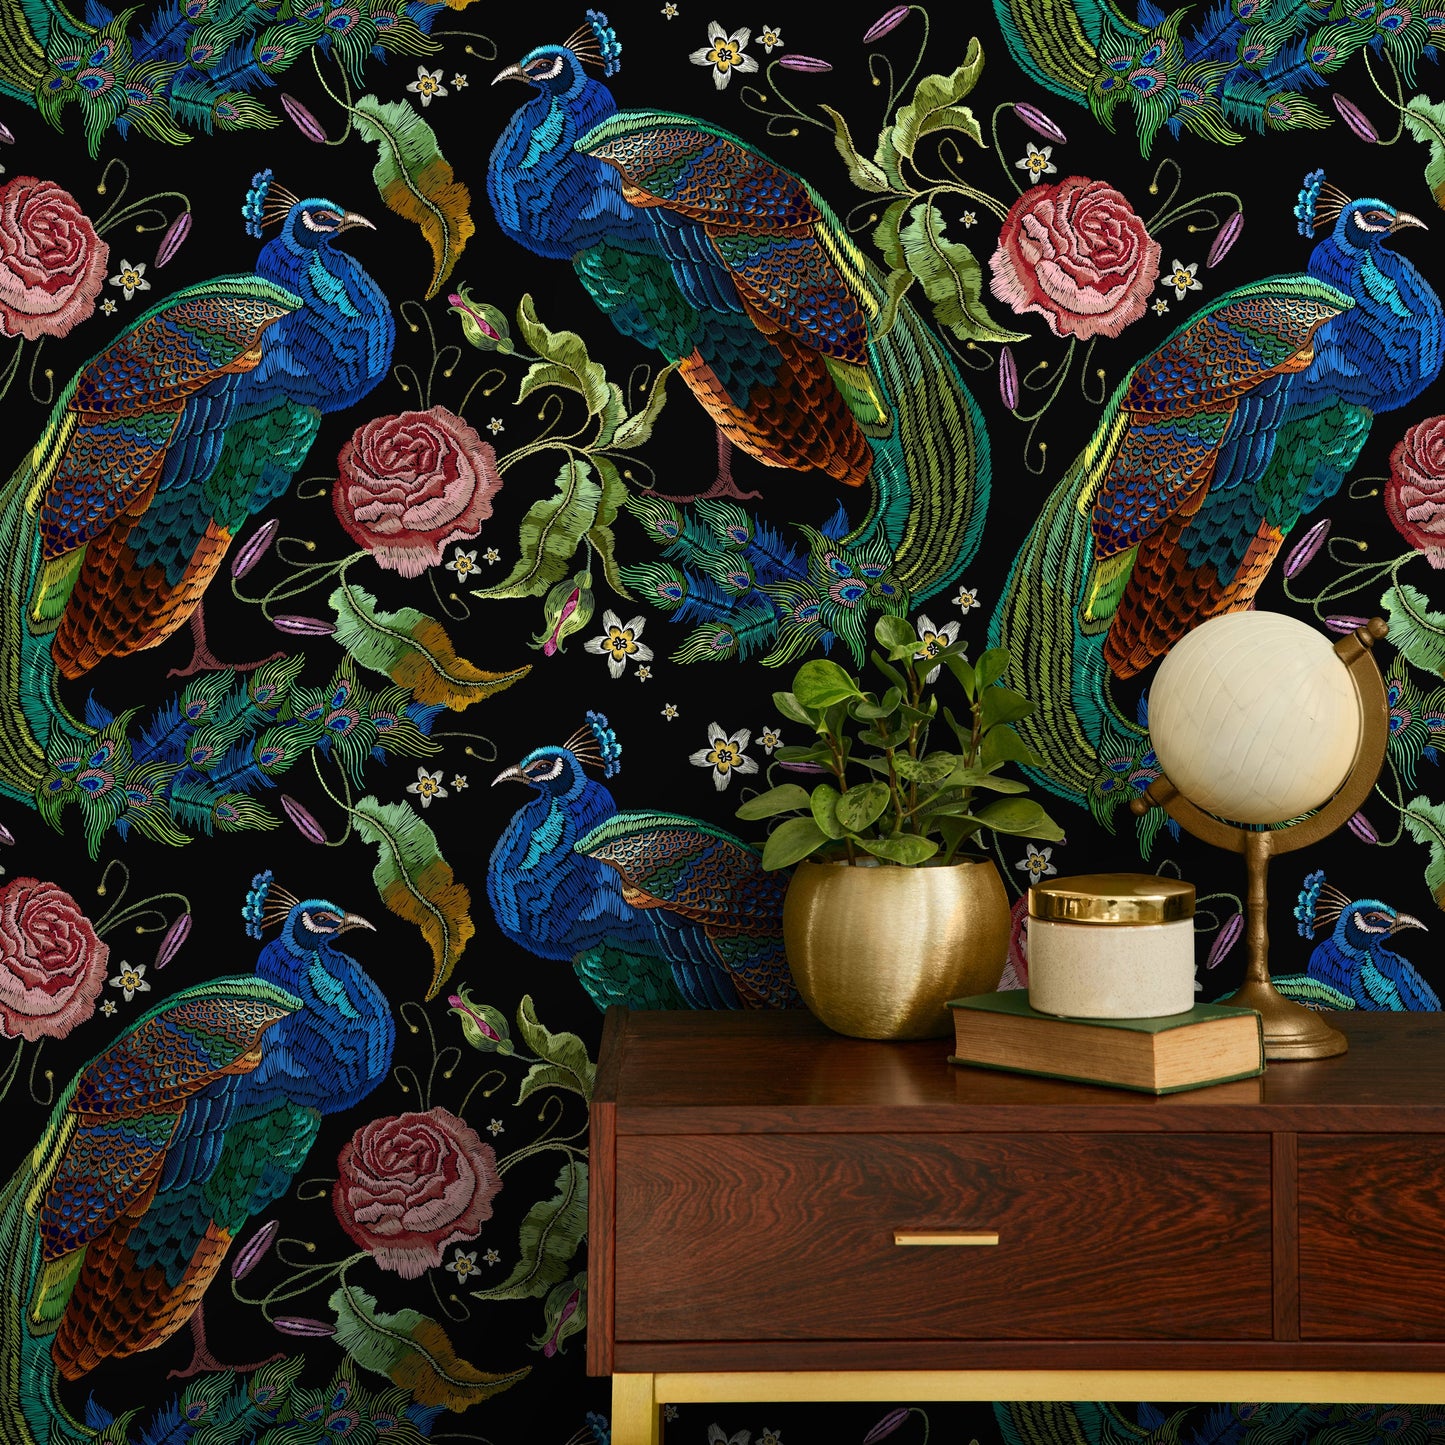 Peacock Wallpaper Dark Floral Wallpaper Peel and Stick and Traditional Wallpaper - D882